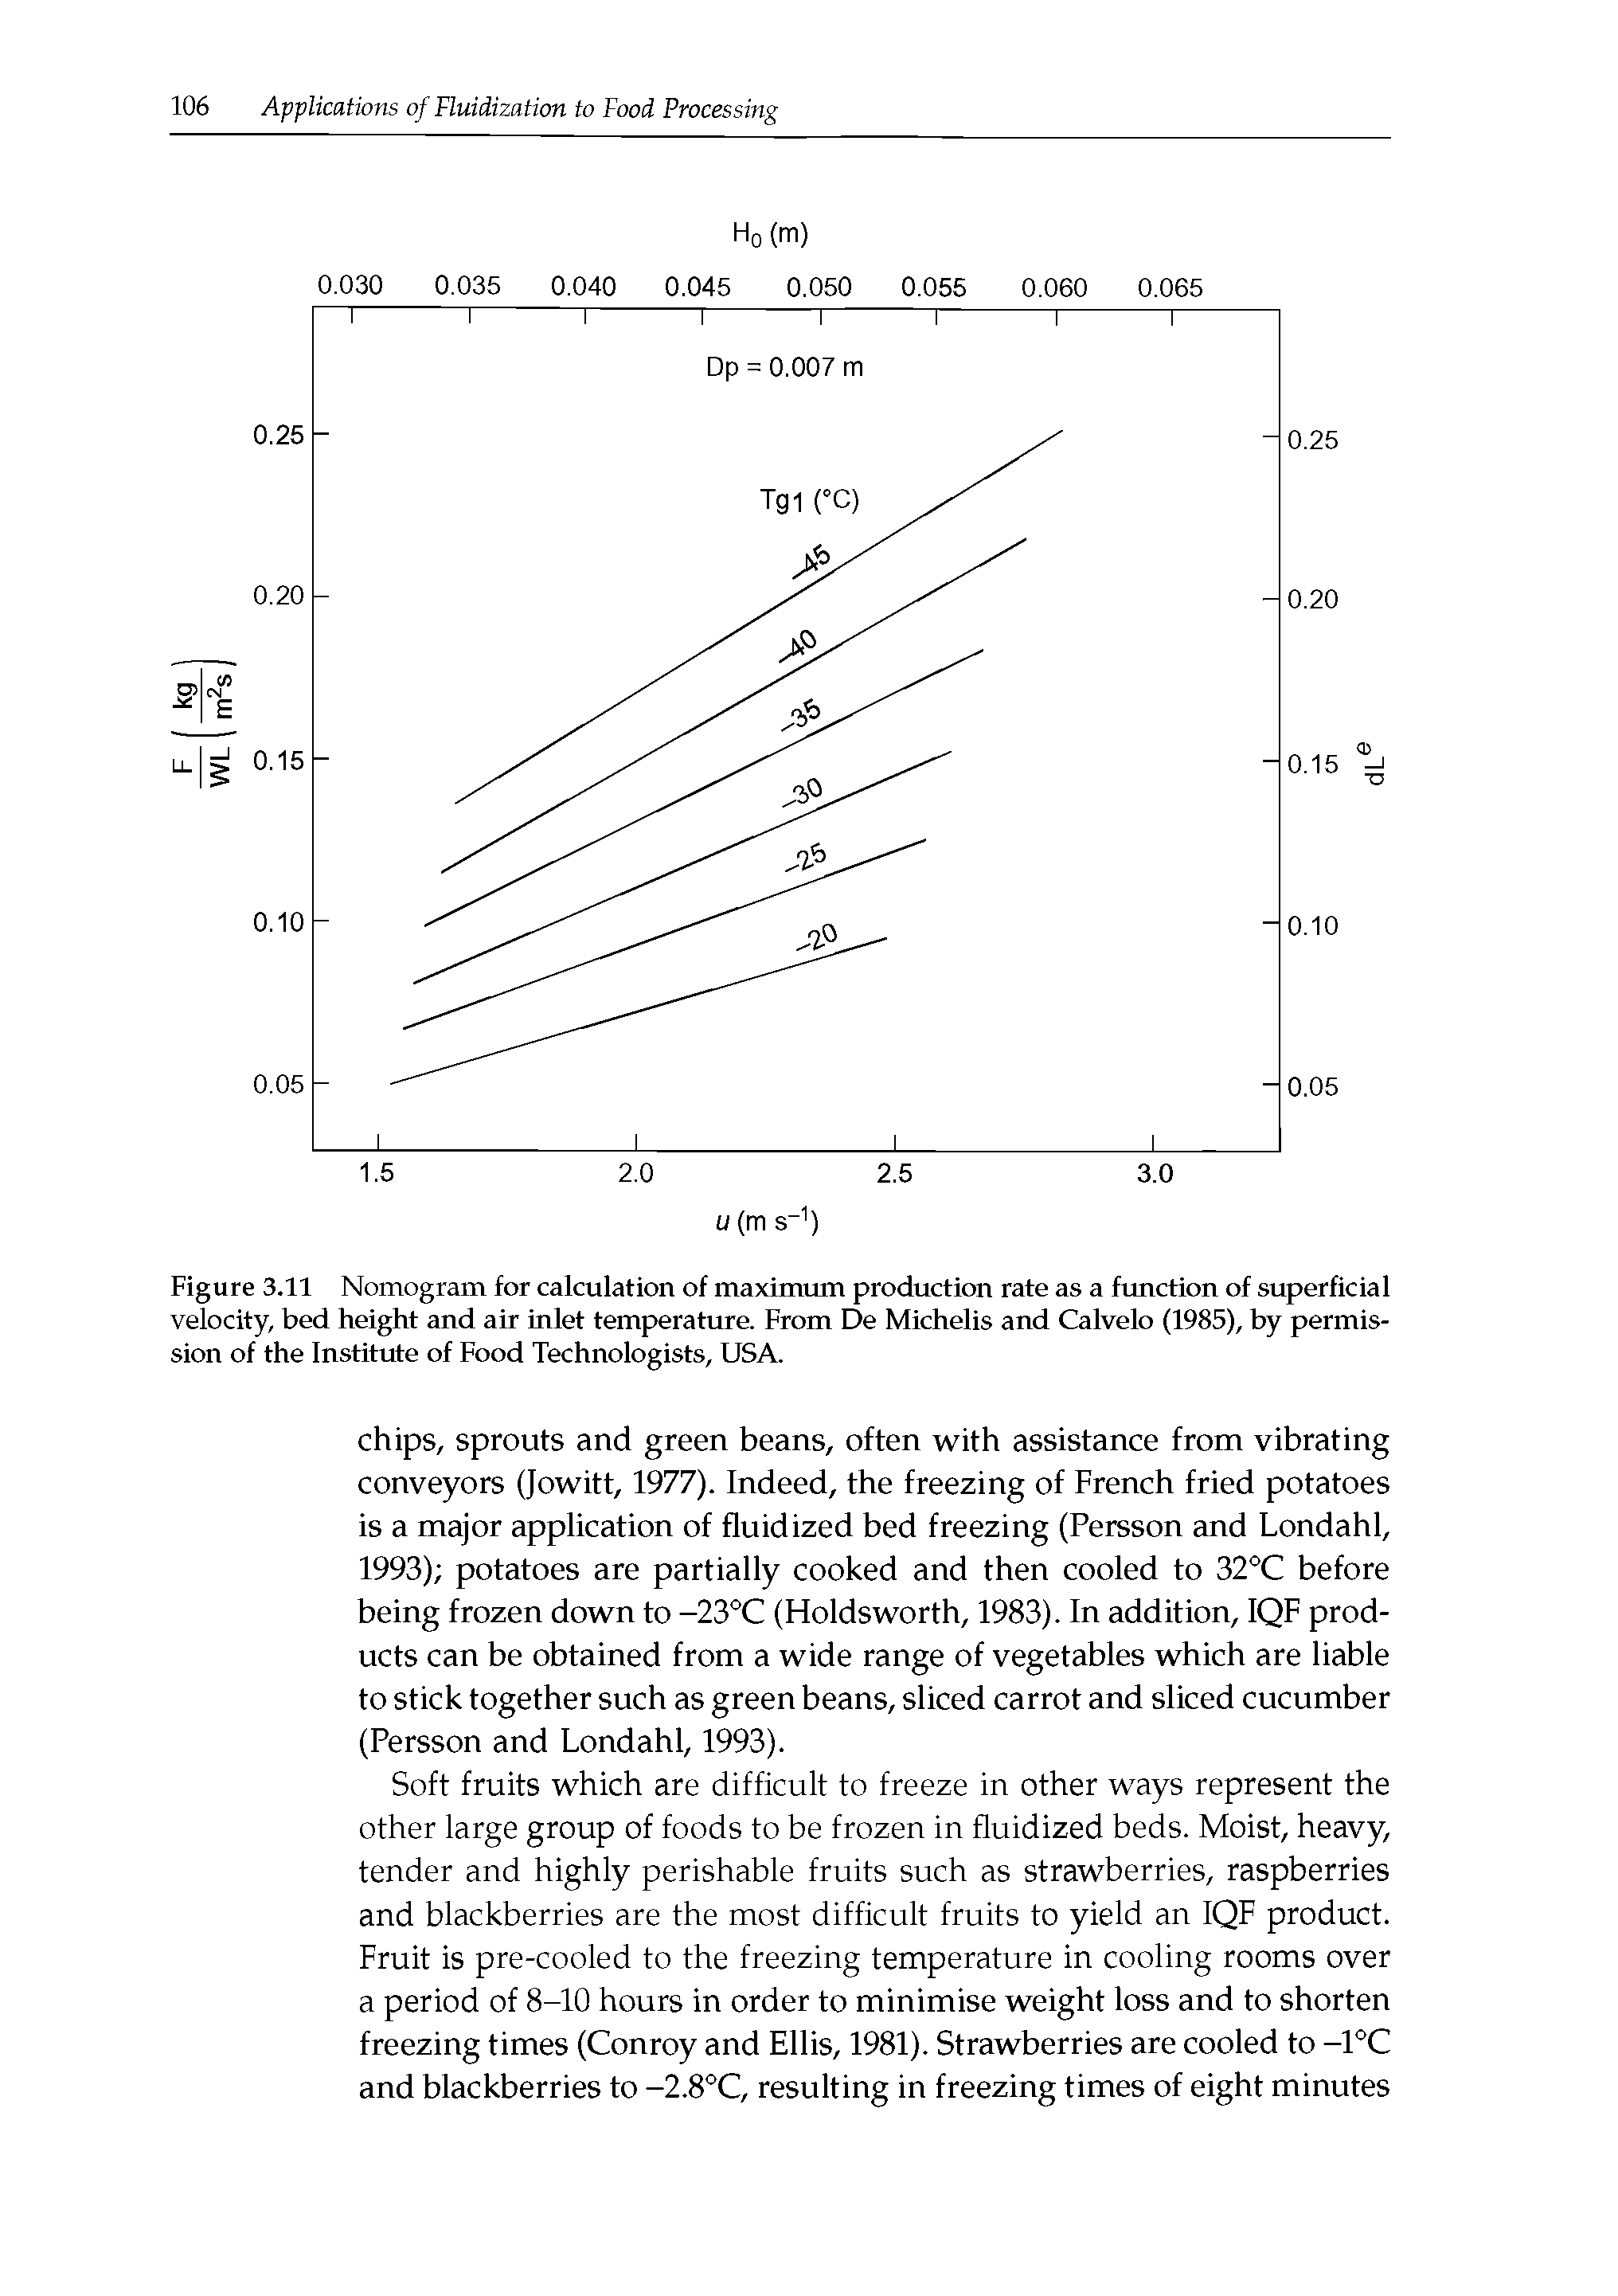 Figure 3.11 Nomogram for calculation of maximum production rate as a fimction of superficial velocity, bed height and air inlet temperature. From De Michelis and Calvelo (1985), by permission of the Institute of Food Technologists, USA.